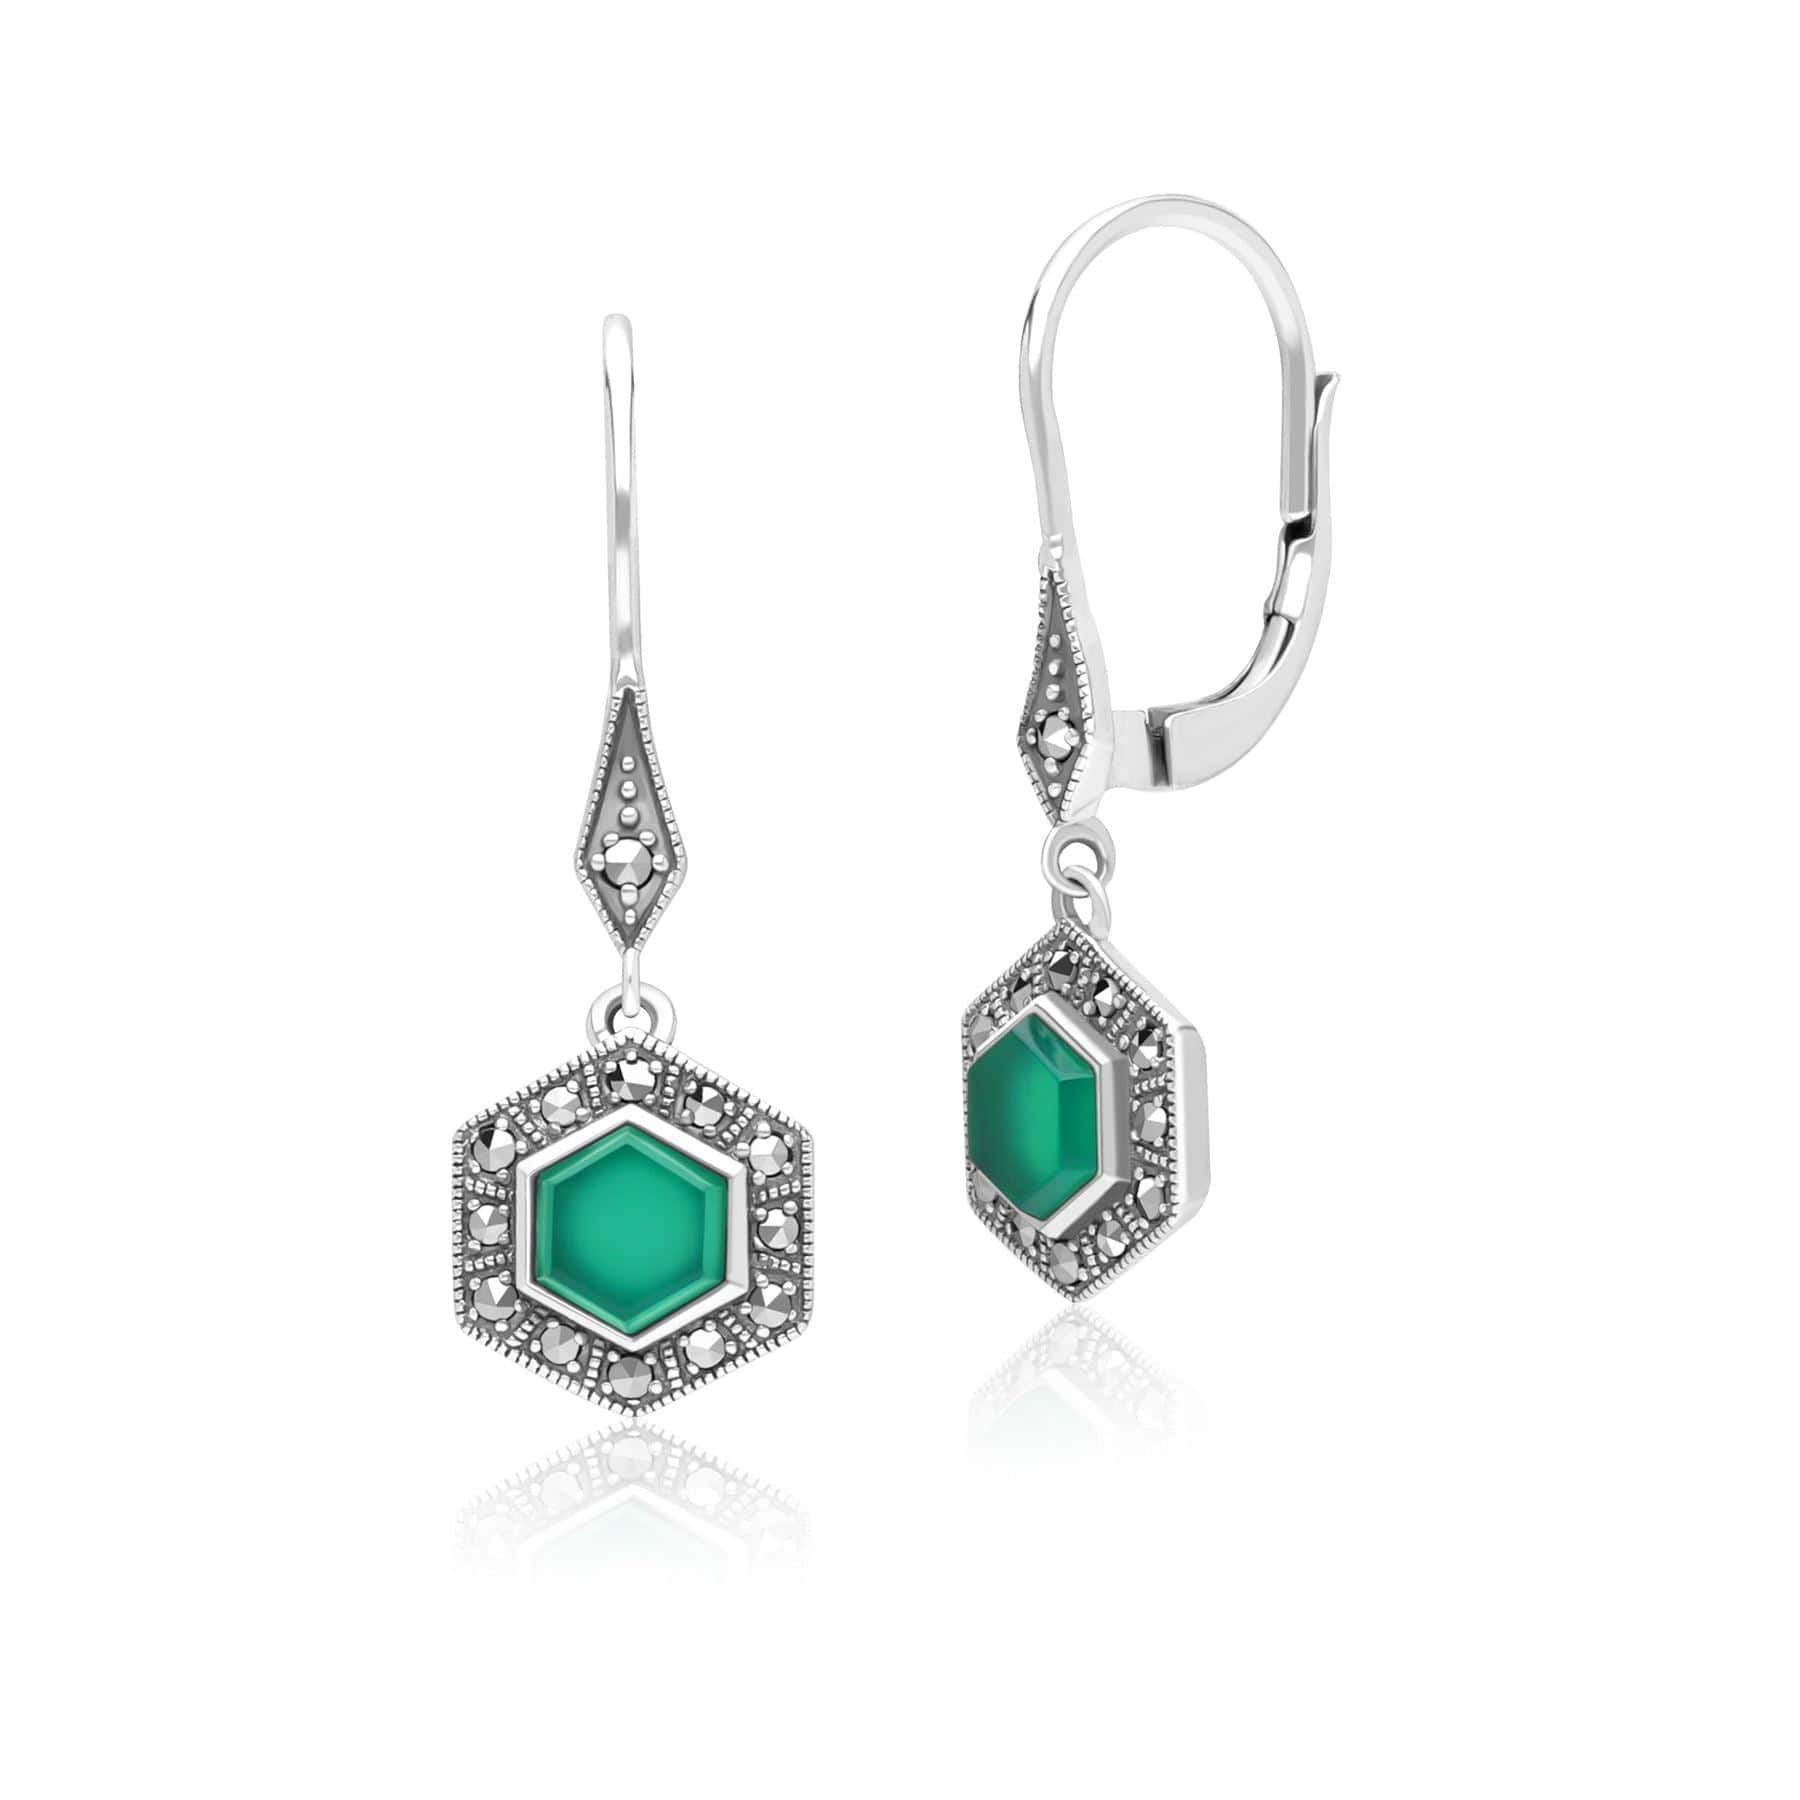 Art Deco Style Hexagon Chalcedony and Marcasite Drop Earrings in Sterling Silver 214E936001925 